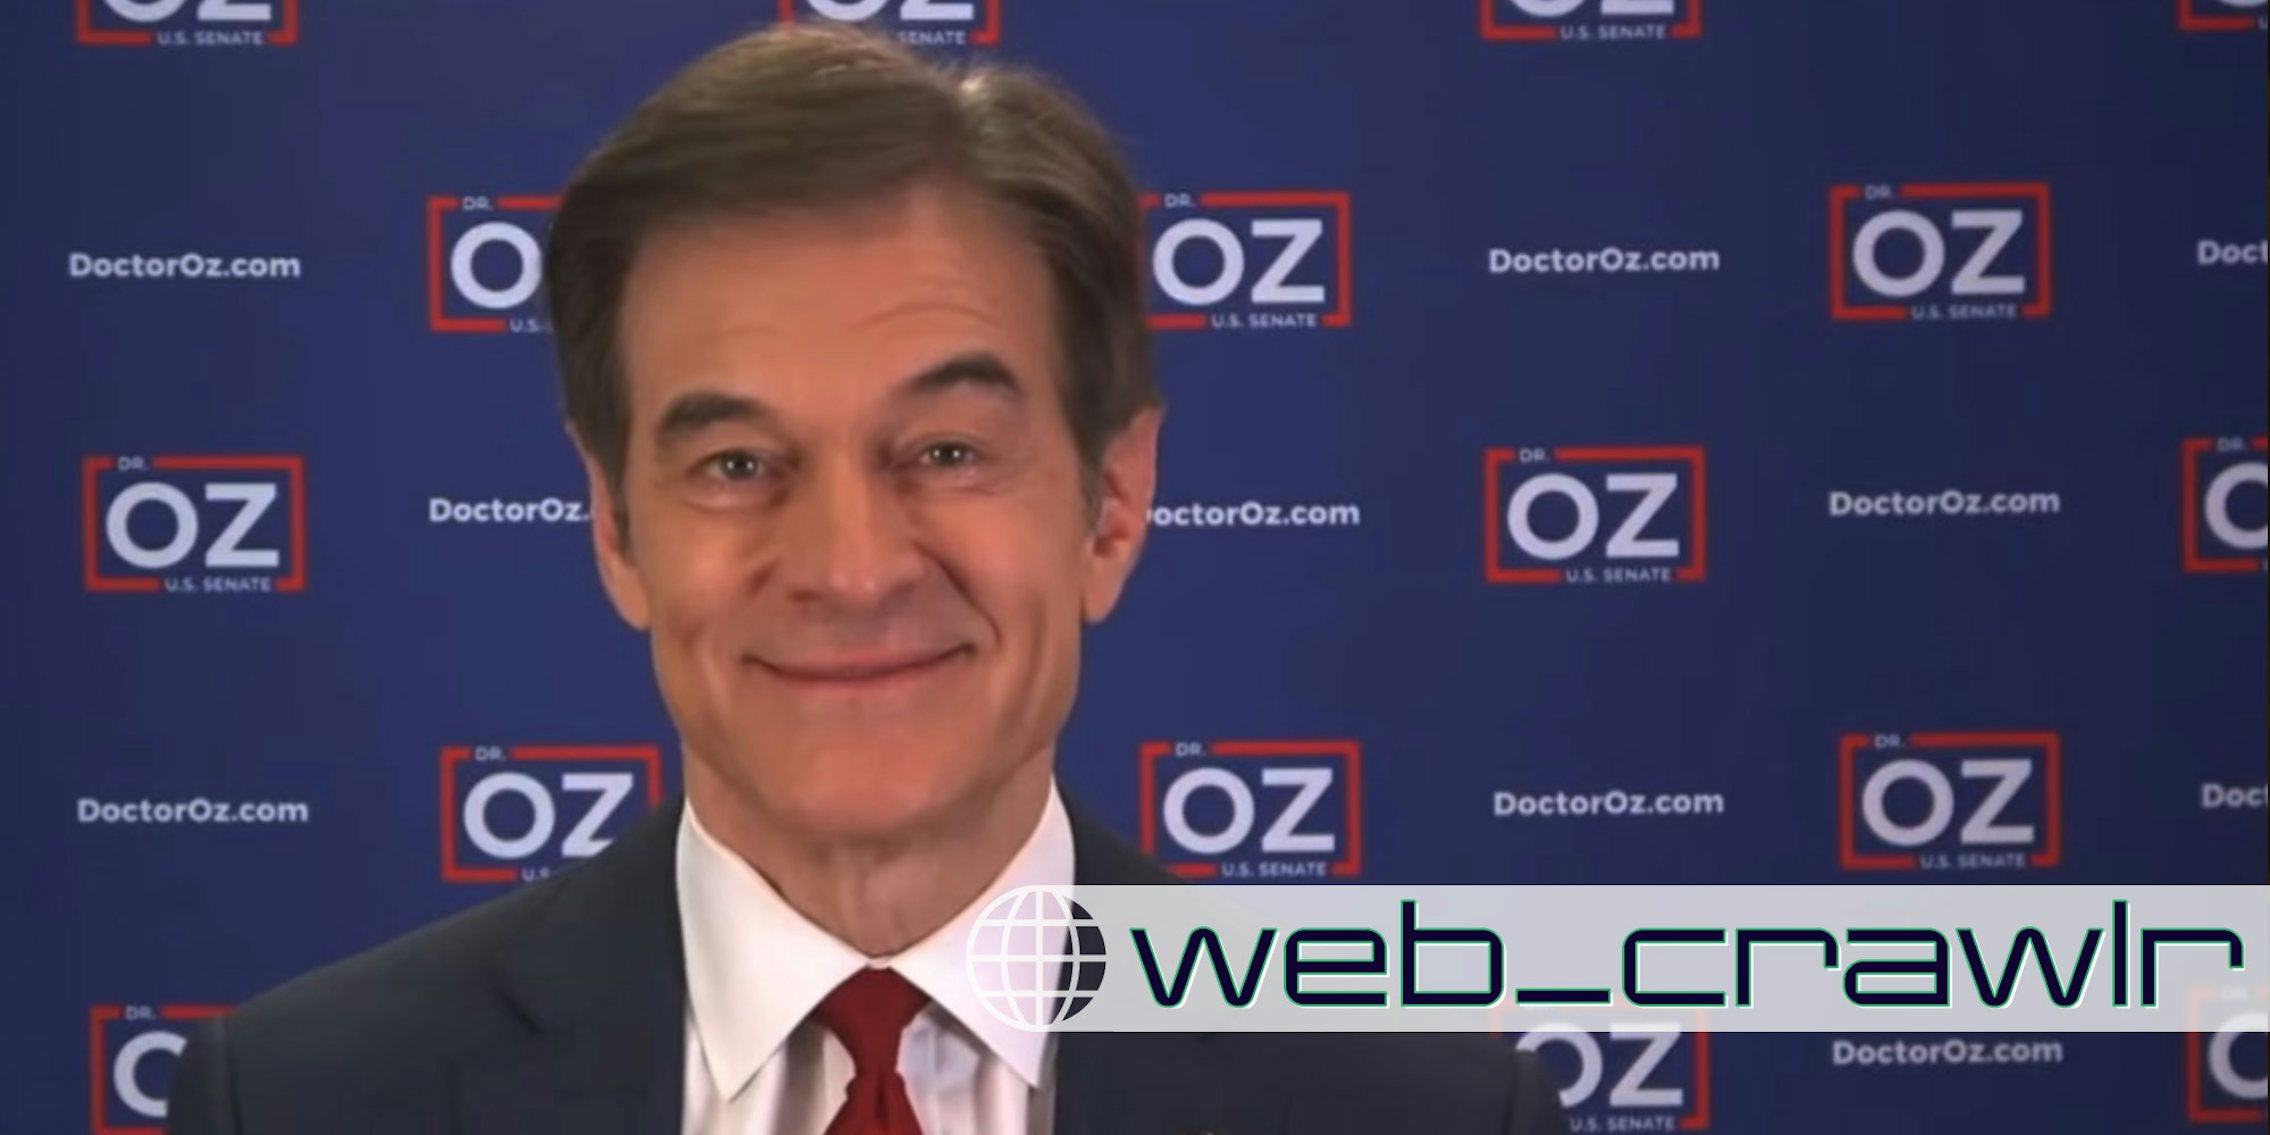 Dr. Oz speaking during an interview. The Daily Dot newsletter web_crawlr logo is in the bottom right corner.